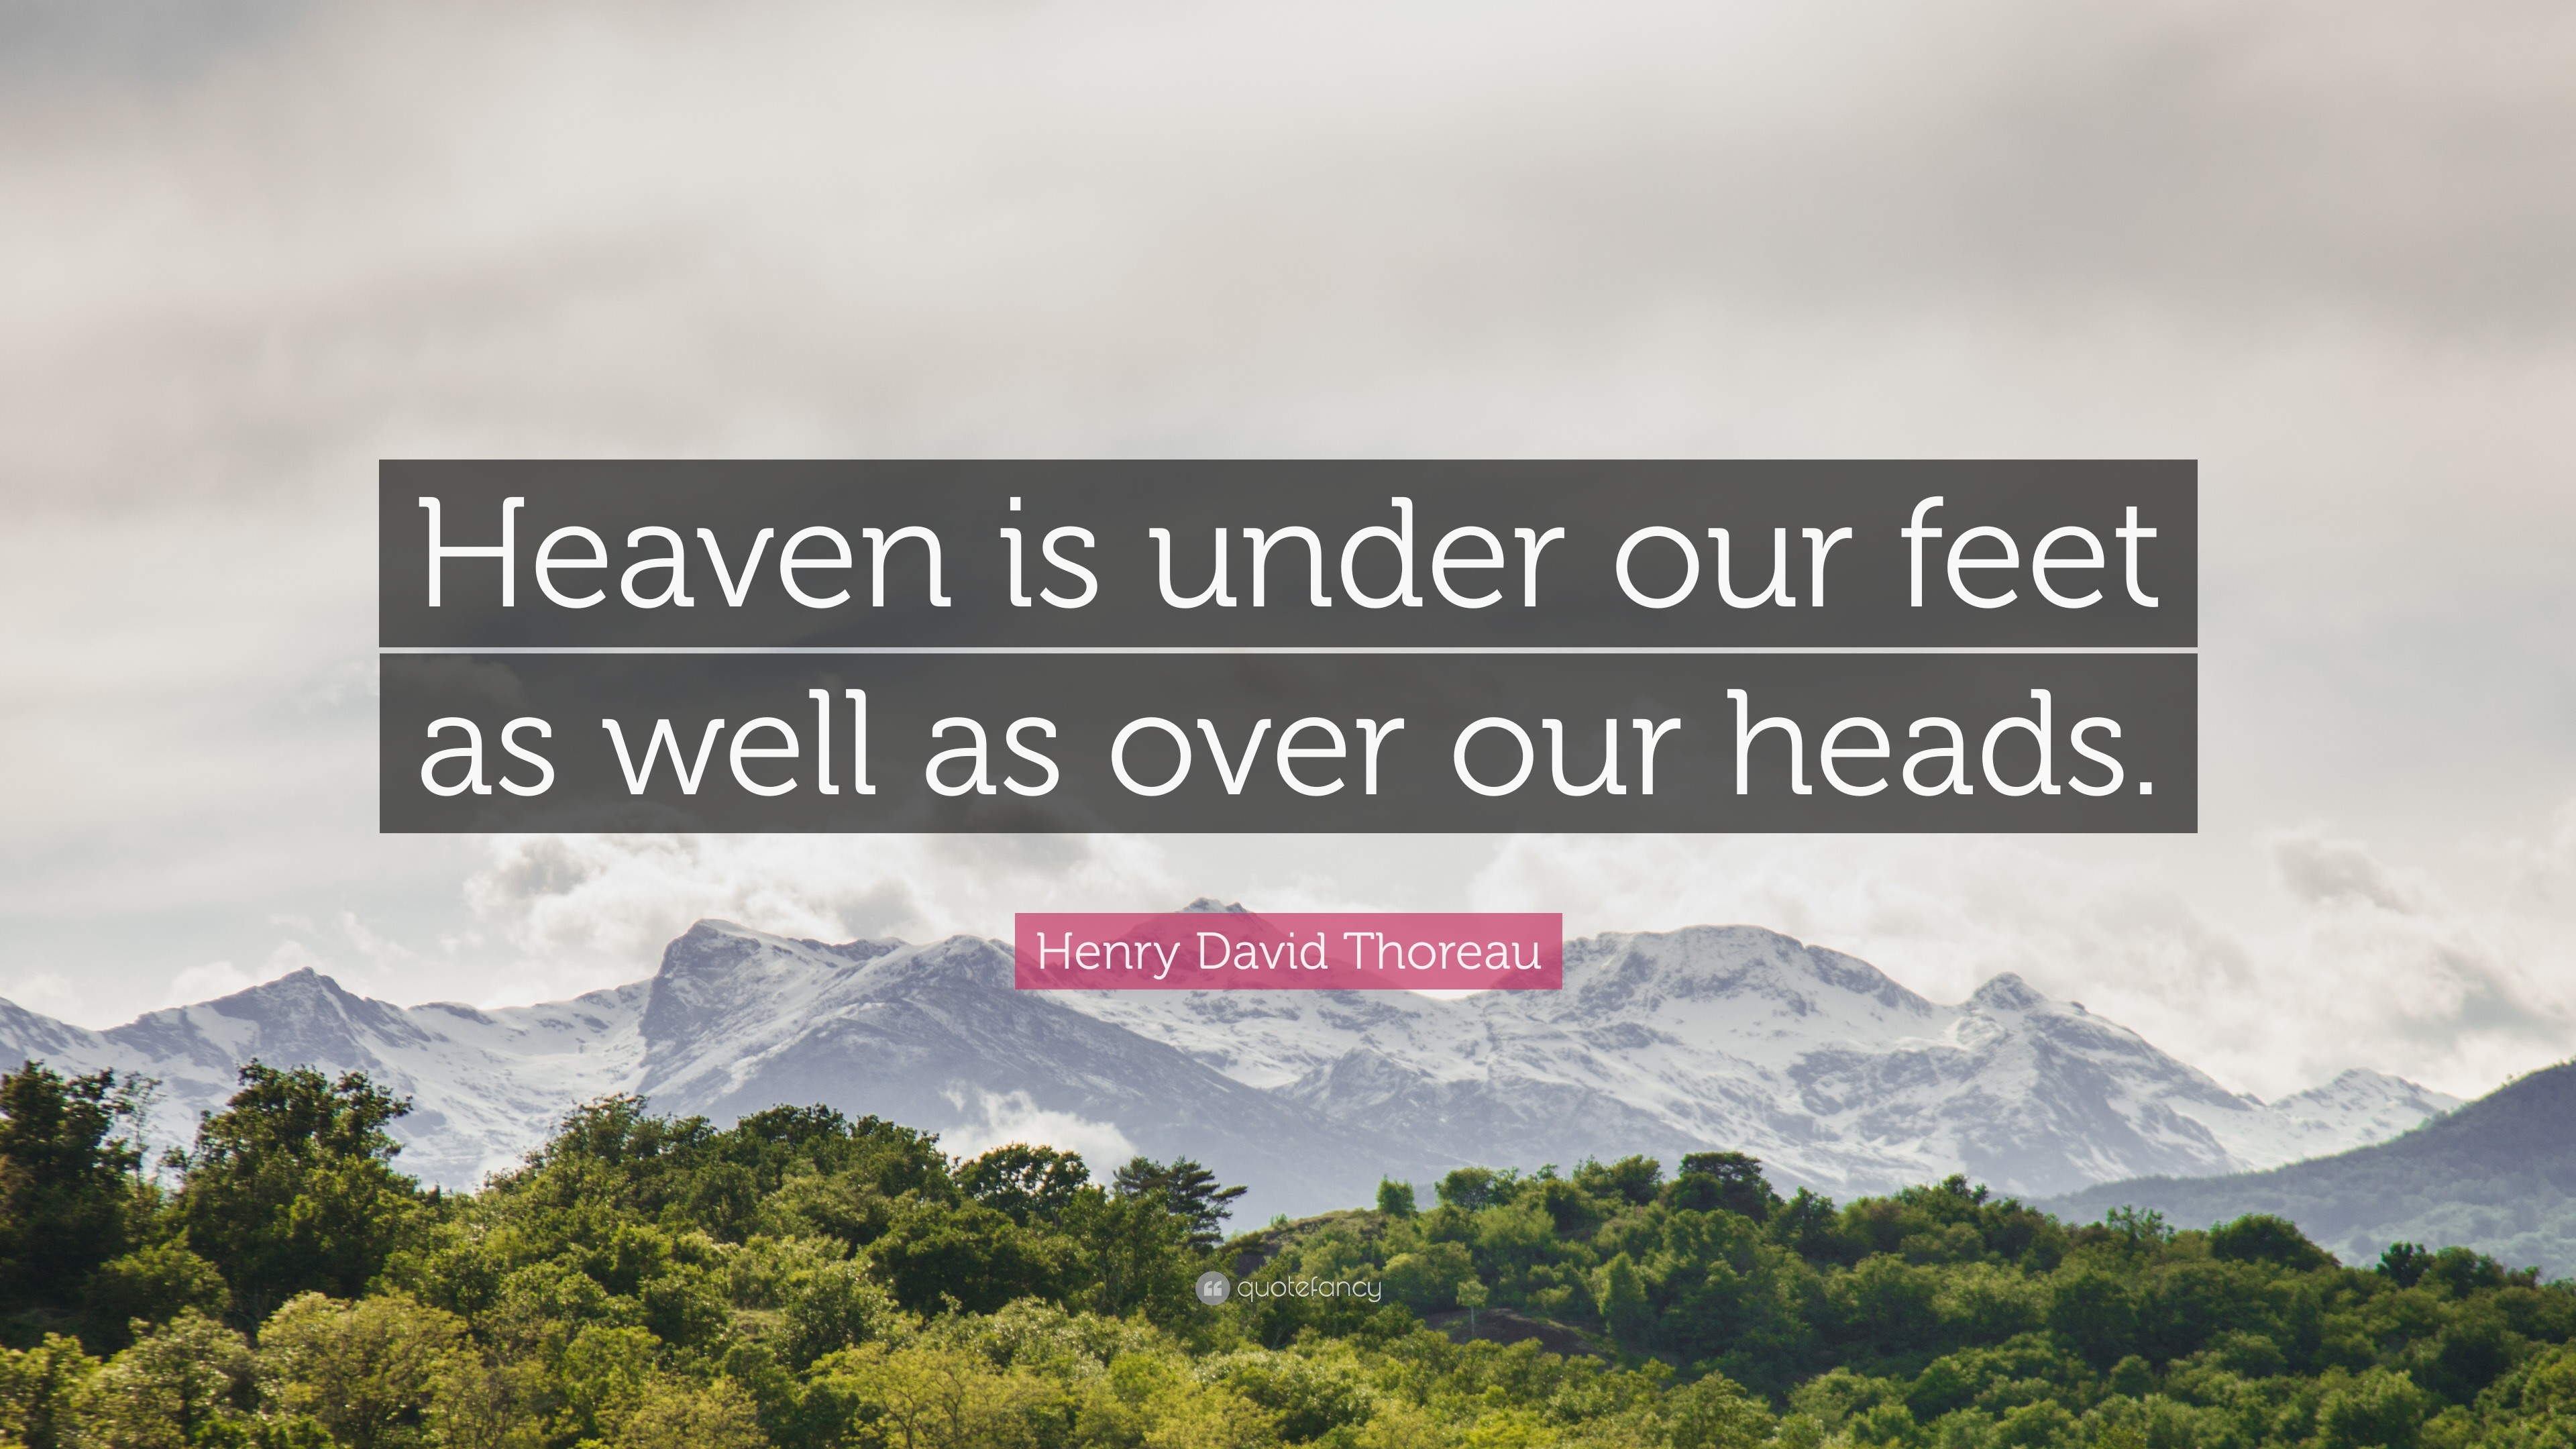 3840x2160 Nature Quotes: “Heaven is under our feet as well as over our heads.